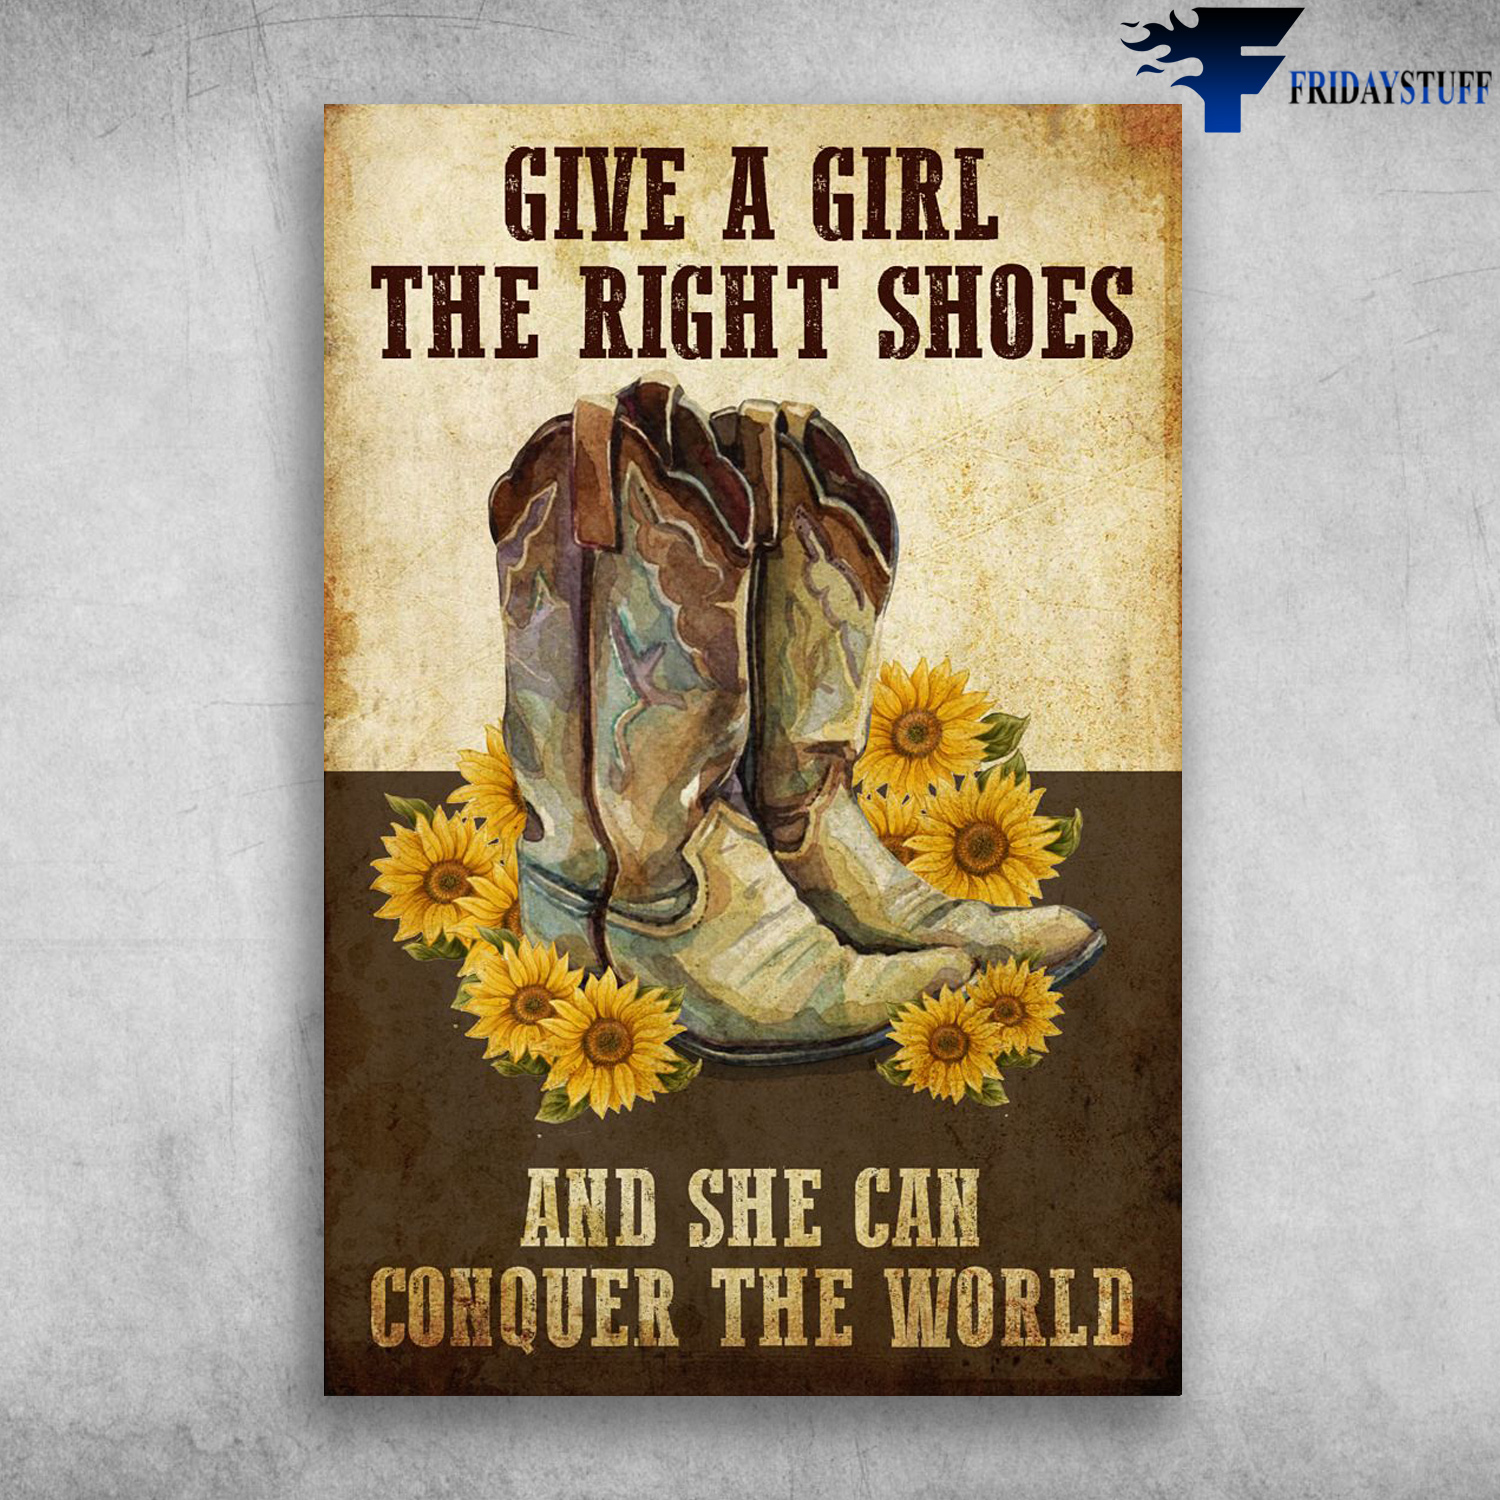 Cowboy Boots - Give A Girl The Right Shoes, And She Can Conquer The World